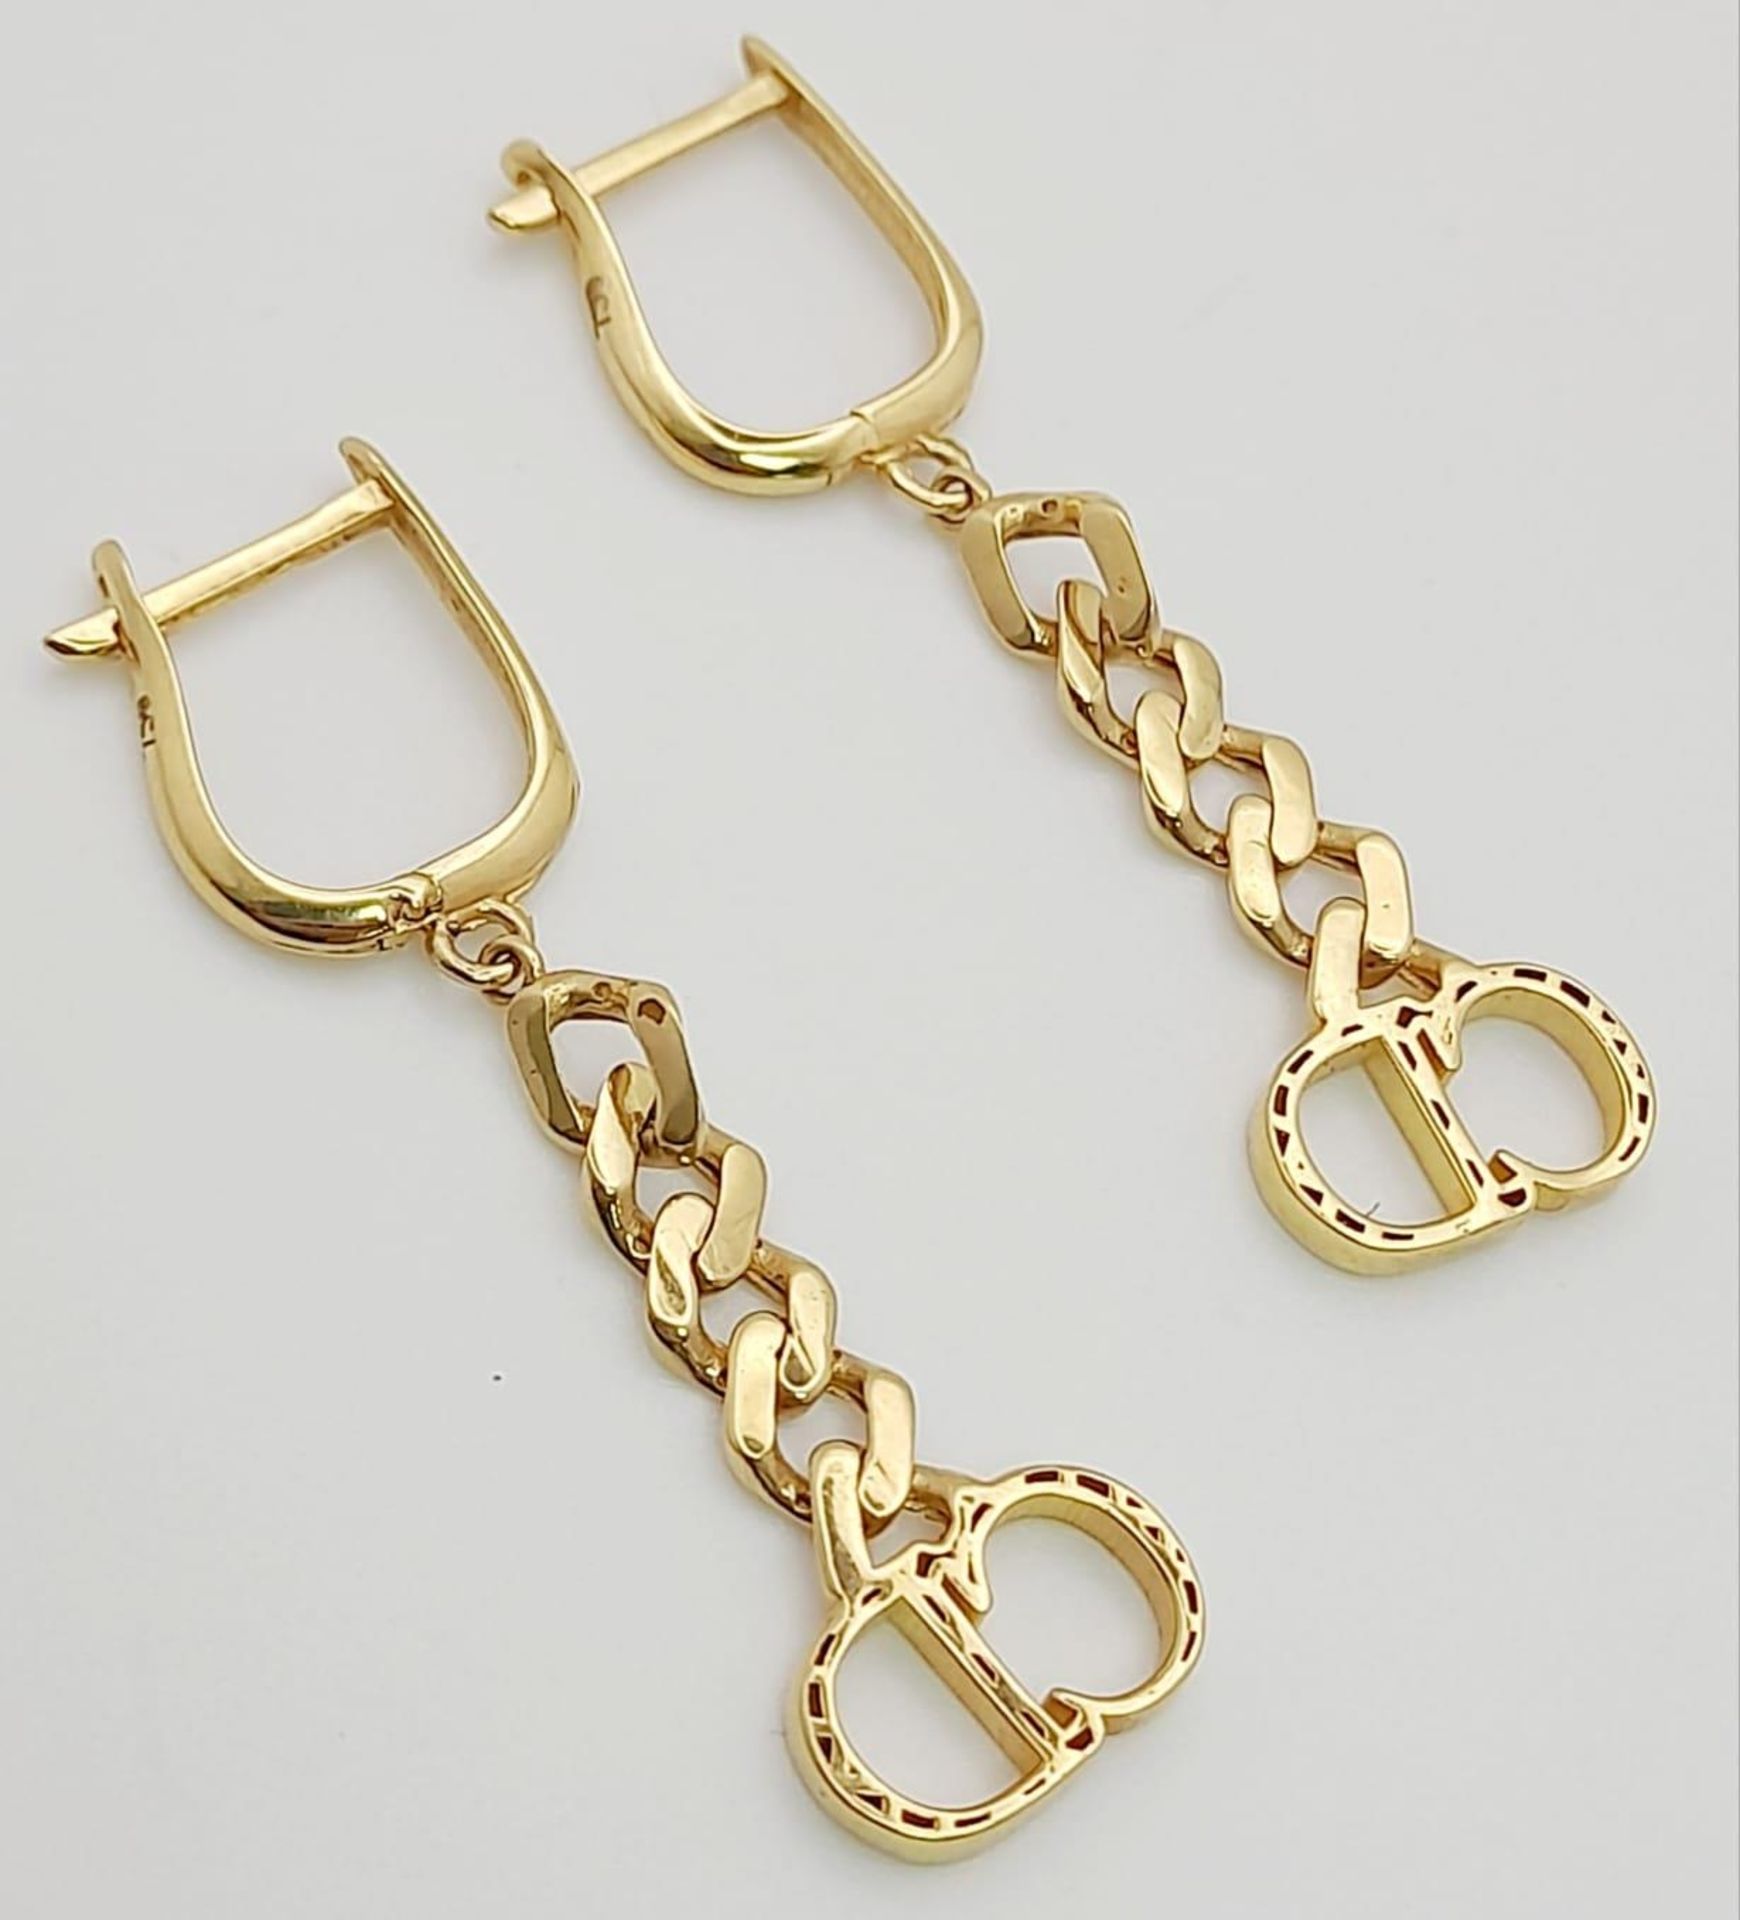 18K YELLOW GOLD CD CHRISTIAN DIOR STYLE DROP EARRINGS. TOTAL WEIGHT 5.5G - Image 2 of 3